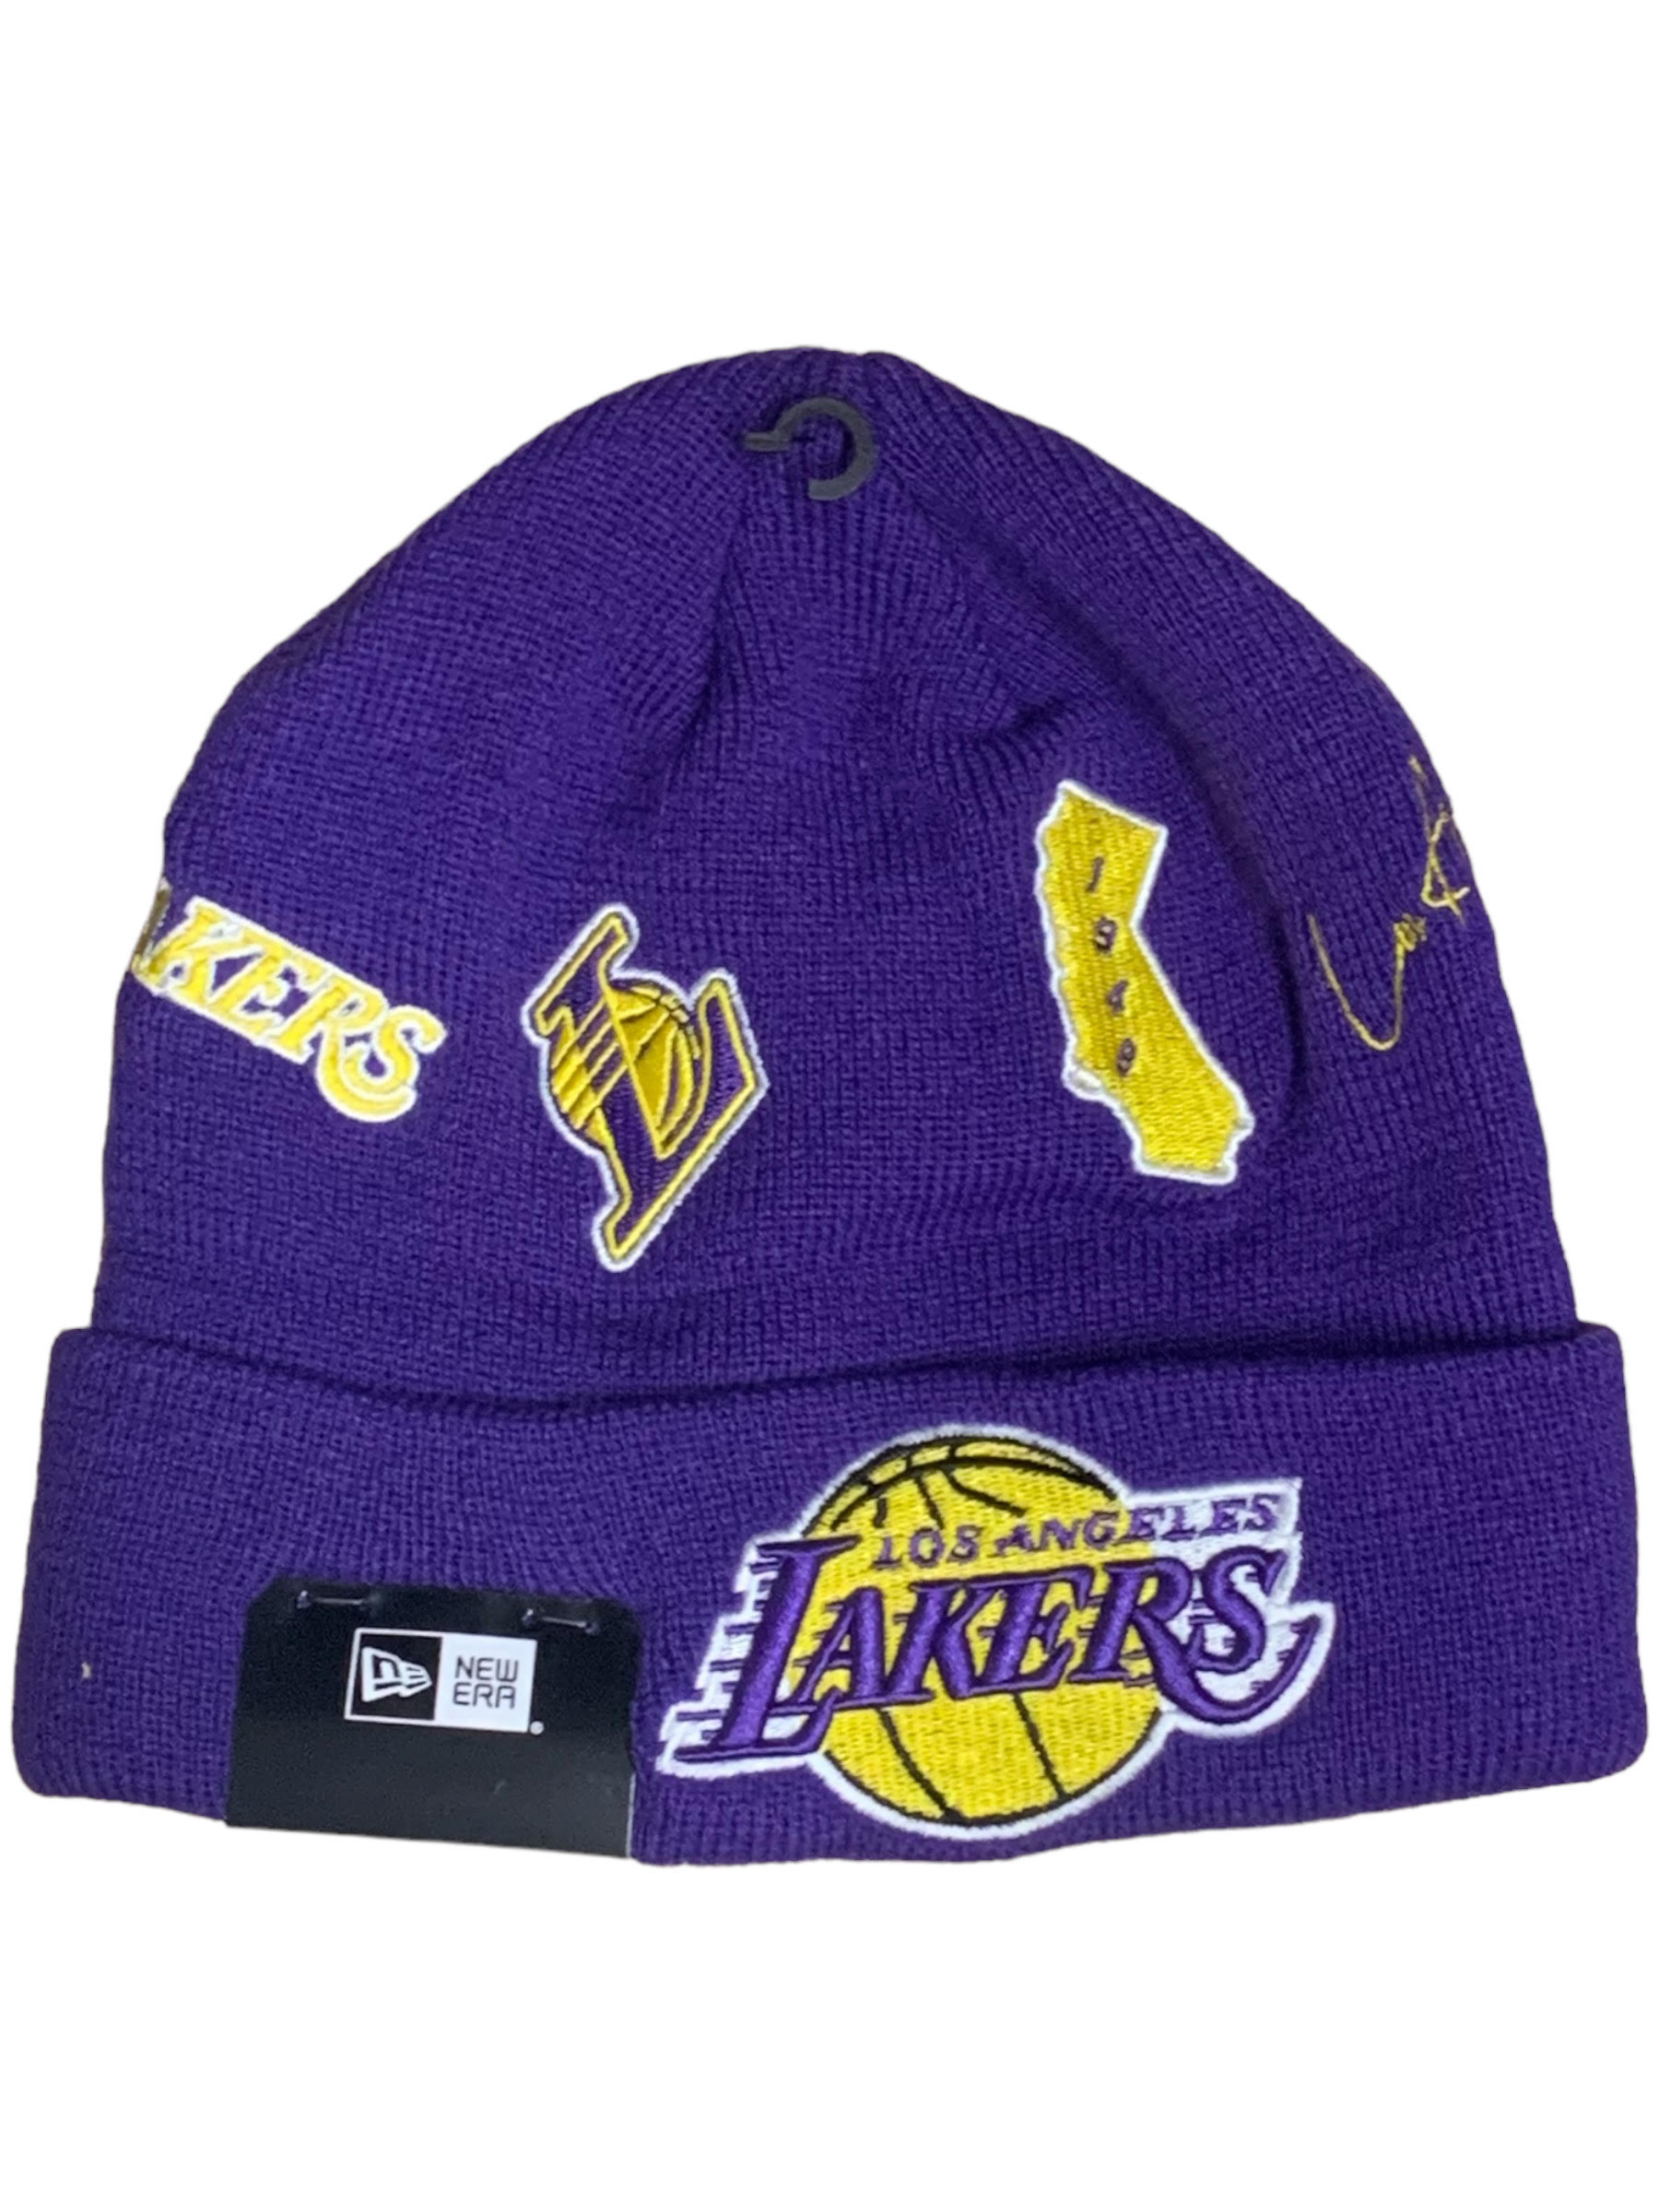 lakers knit hats